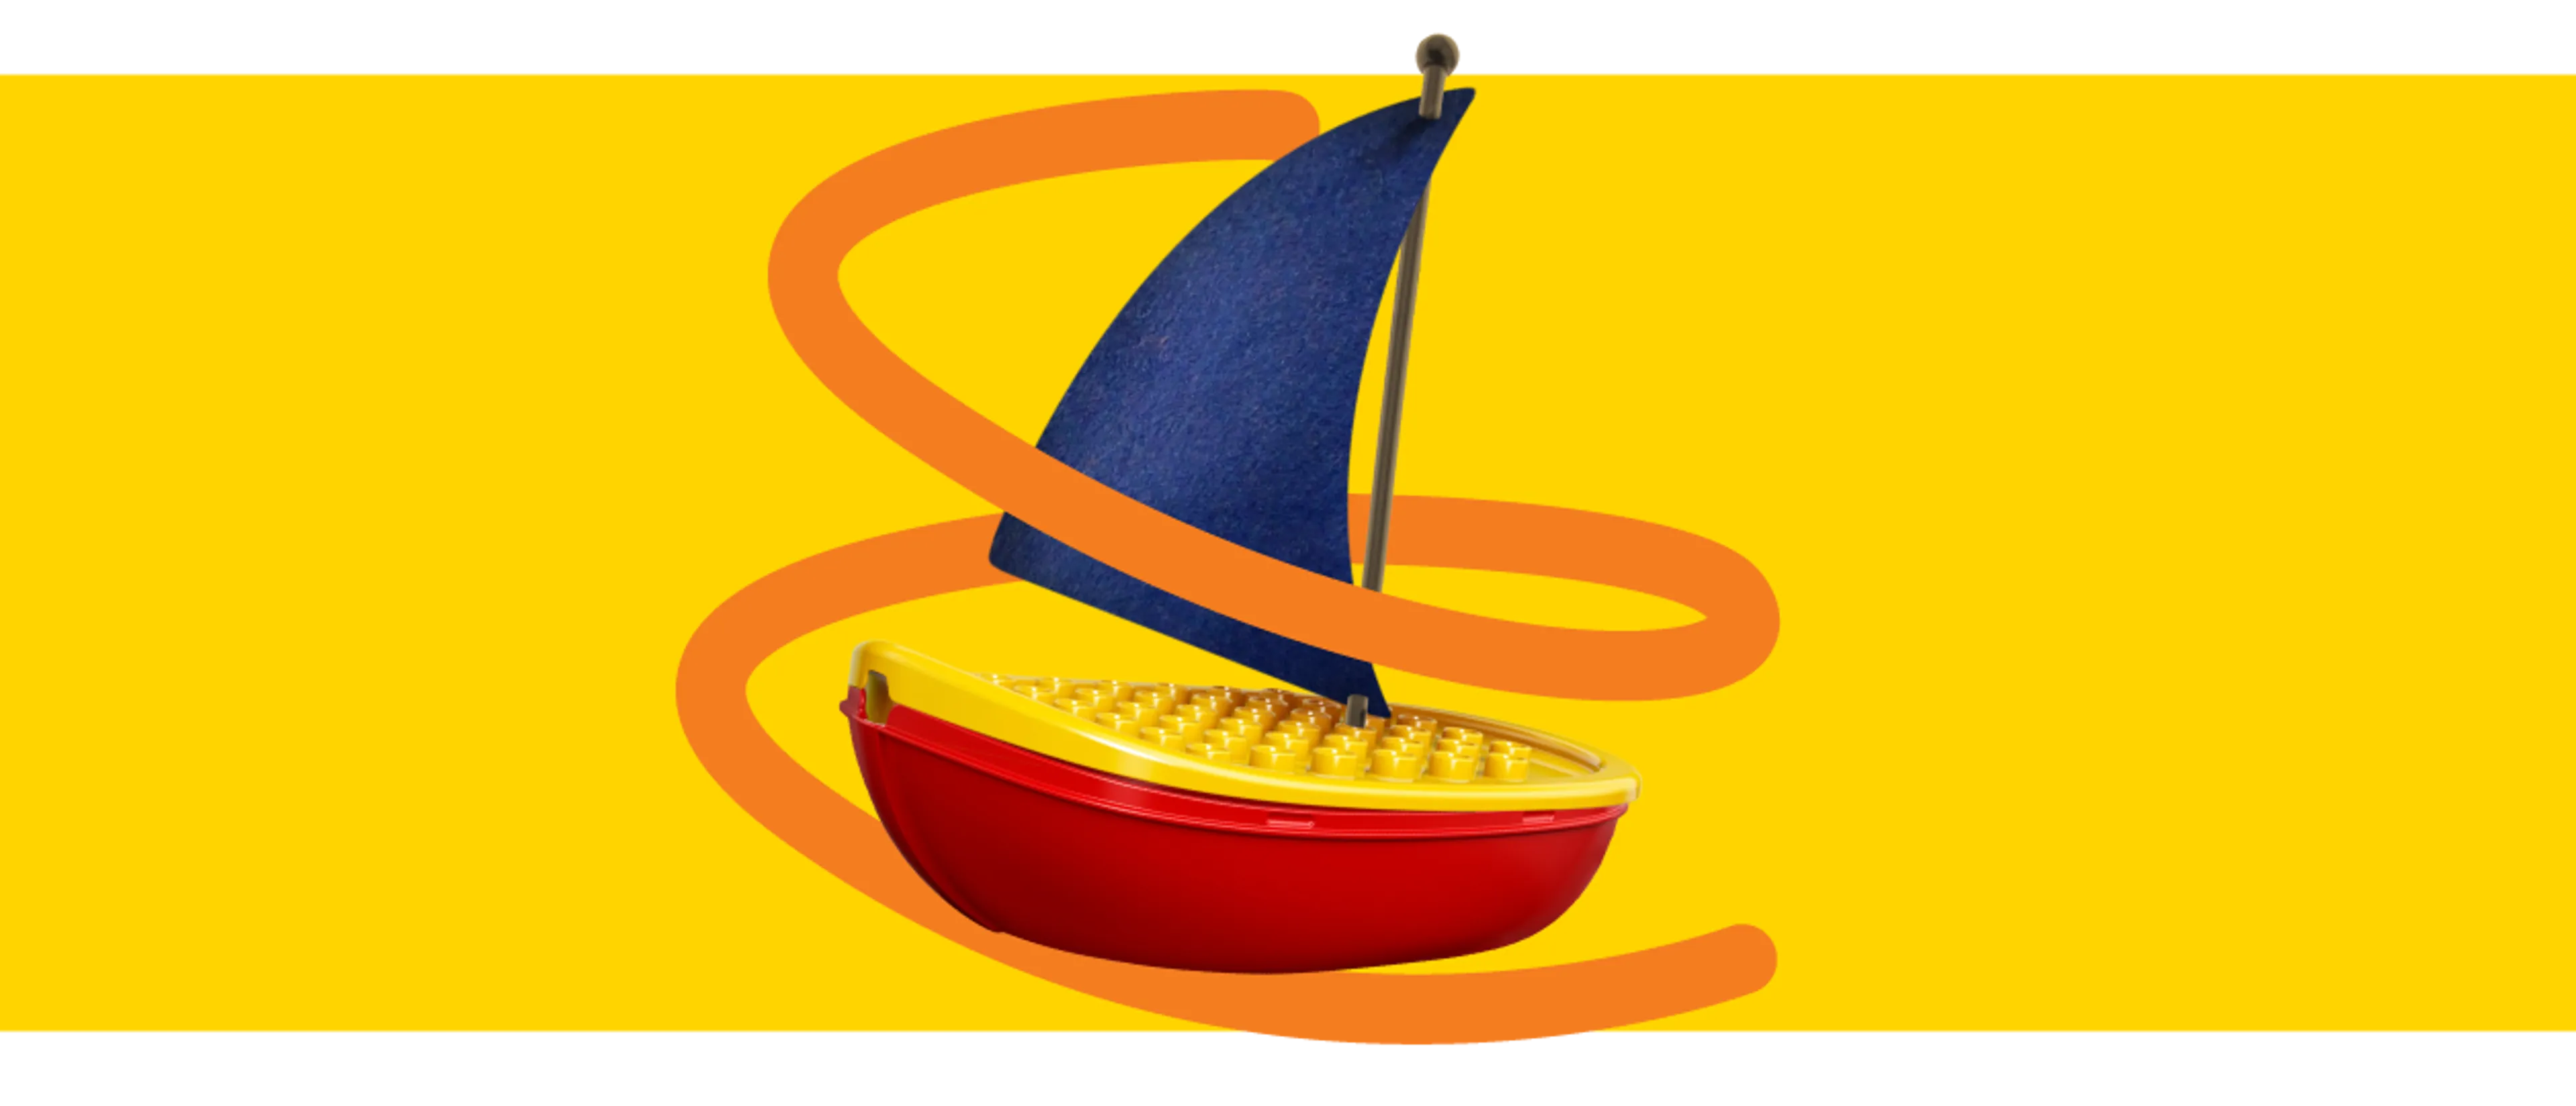 An image of a LEGO DUPLO boat